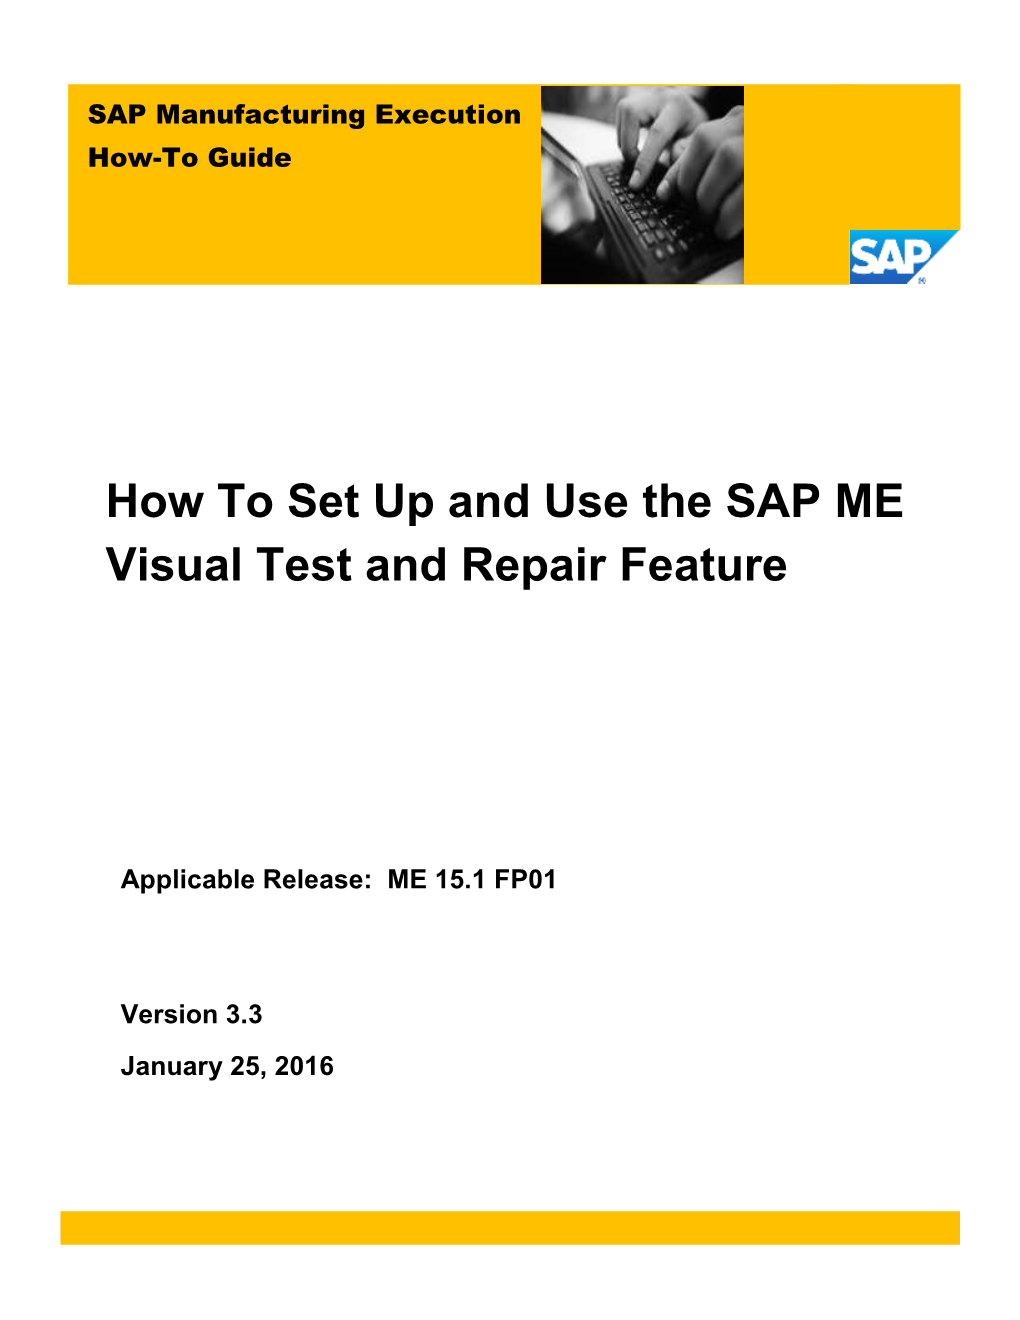 SAP ME How-To-Guide for Visual Test and Repair (VTR)